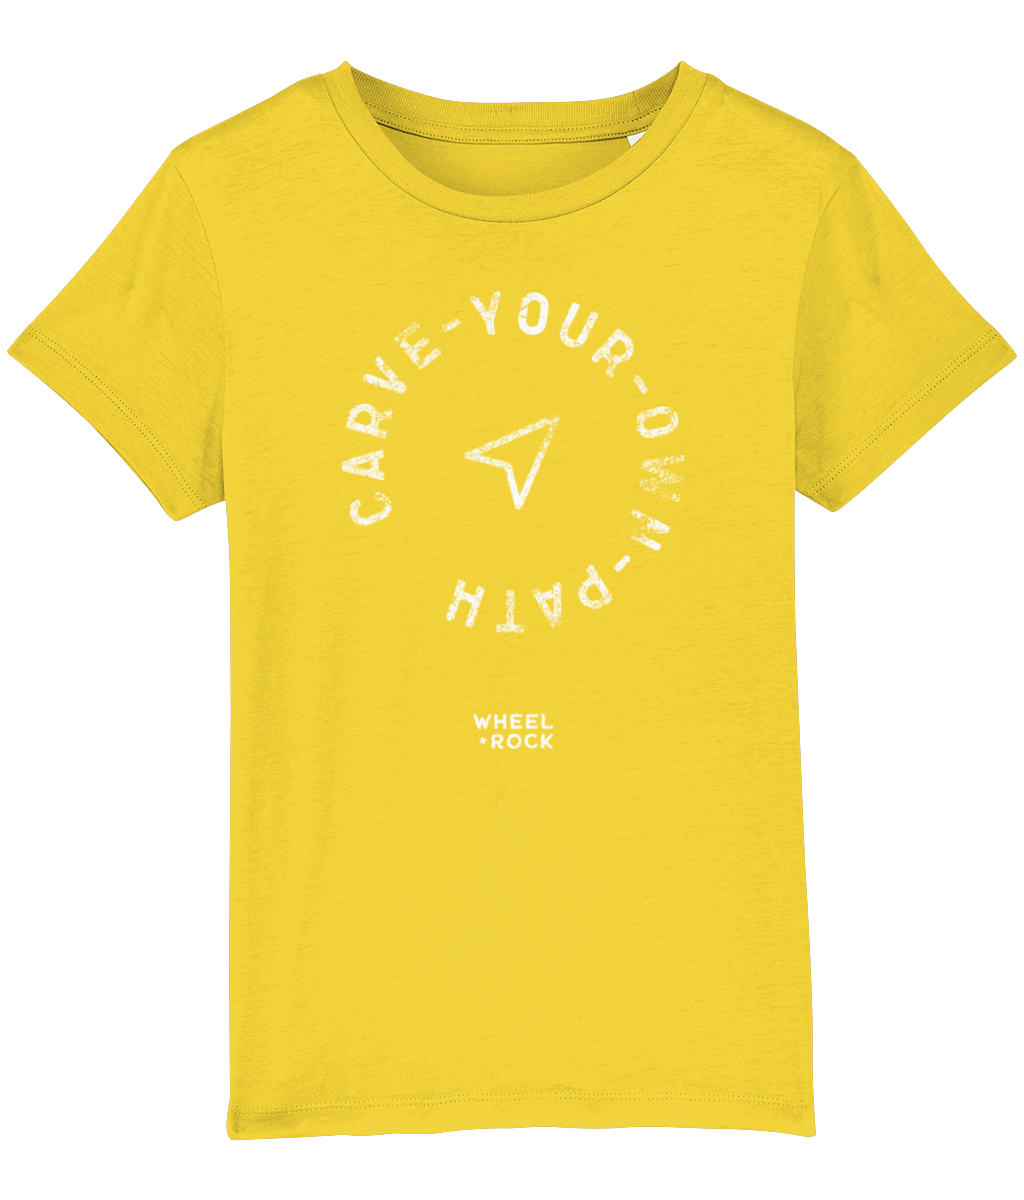 Carve Your Own Path - Kids Tee - BRIGHTS